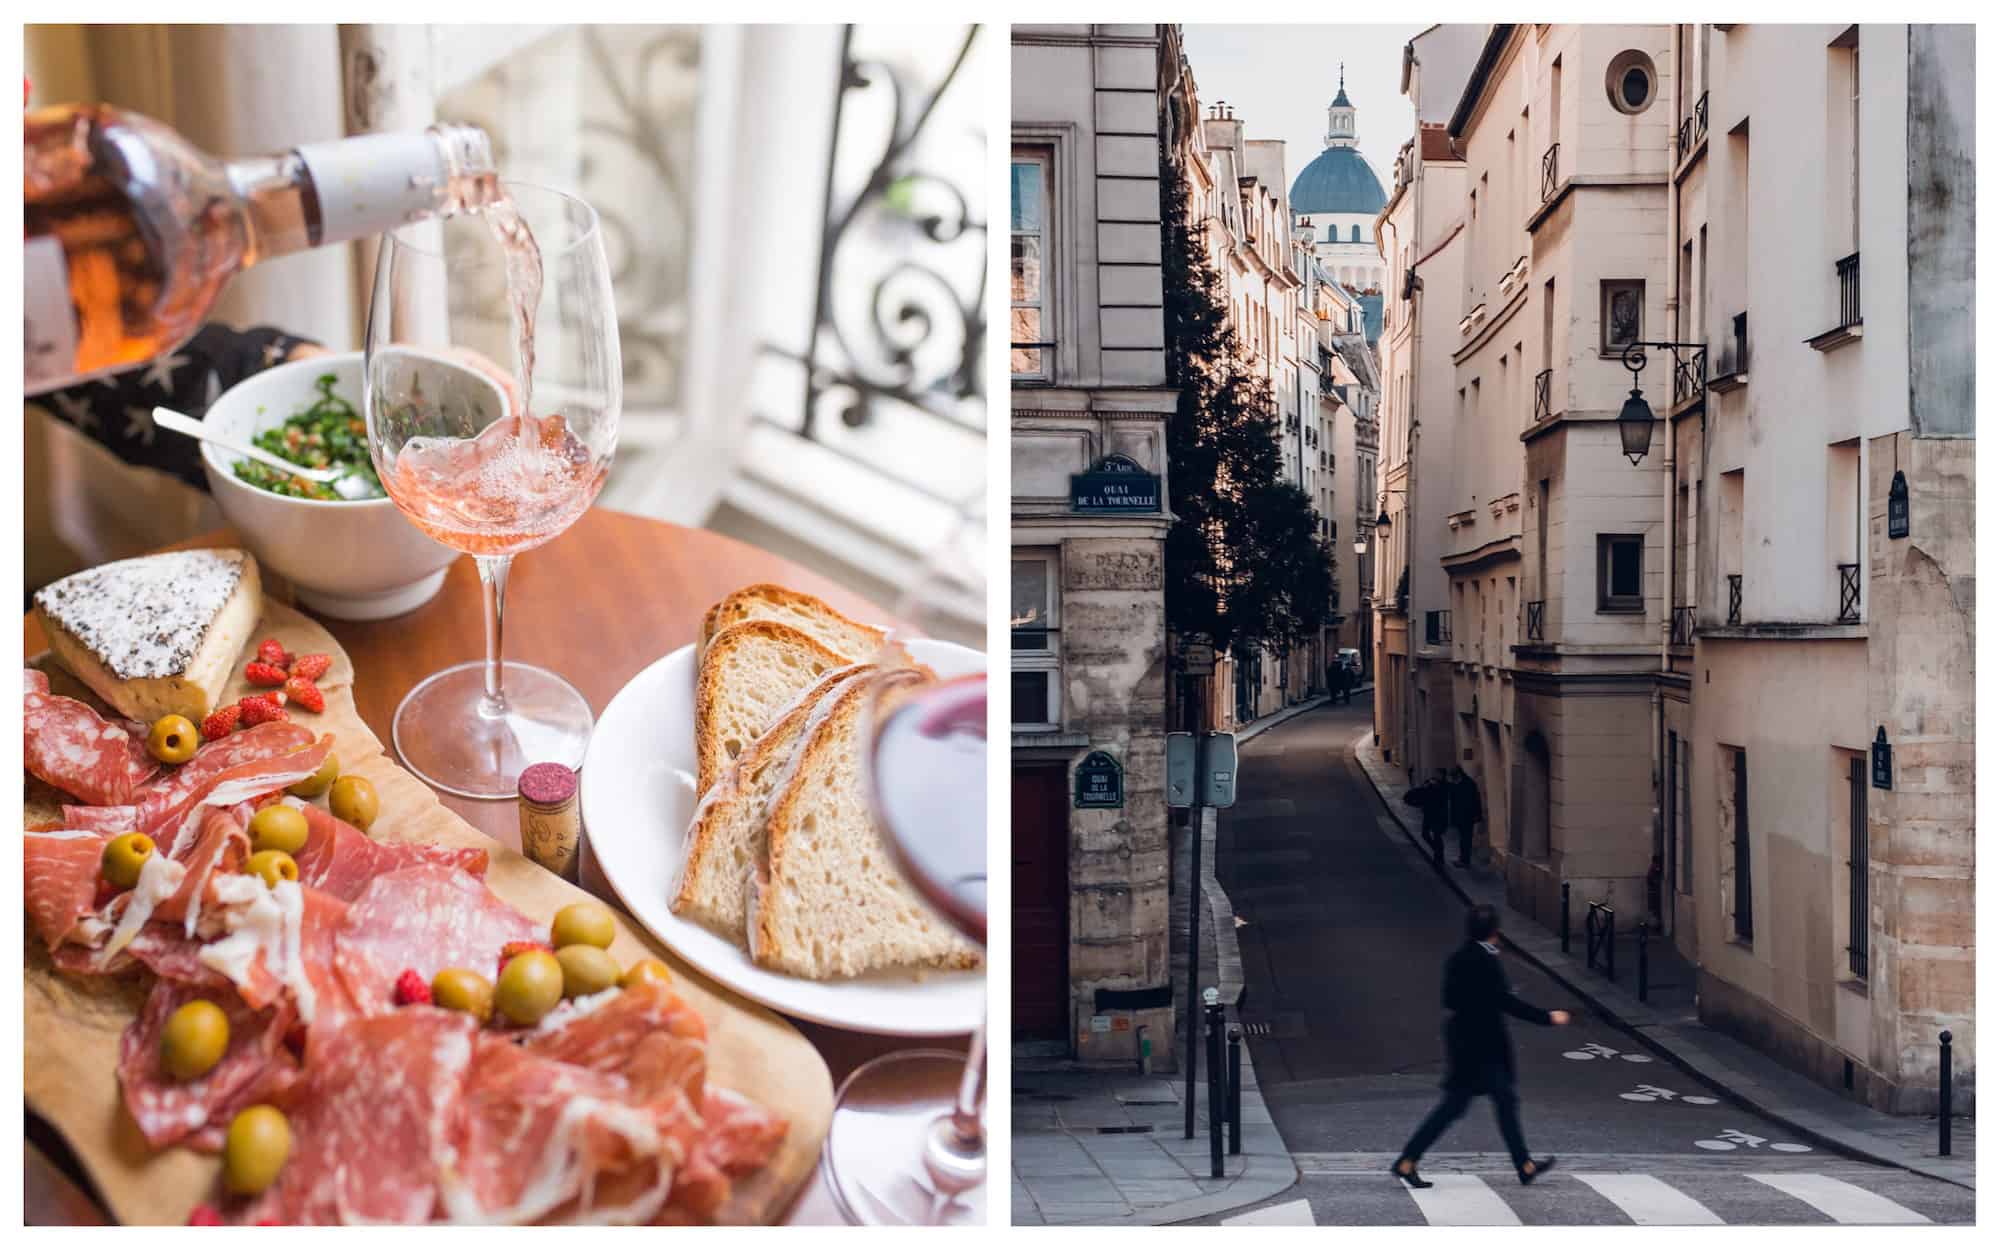 HiP Paris Blog tells the story of la rentree, when Parisians return to the city after summers of aperitifs of hams and wine (left). Paris is quietest in the summer and it's possible to have the city to yourself (right).